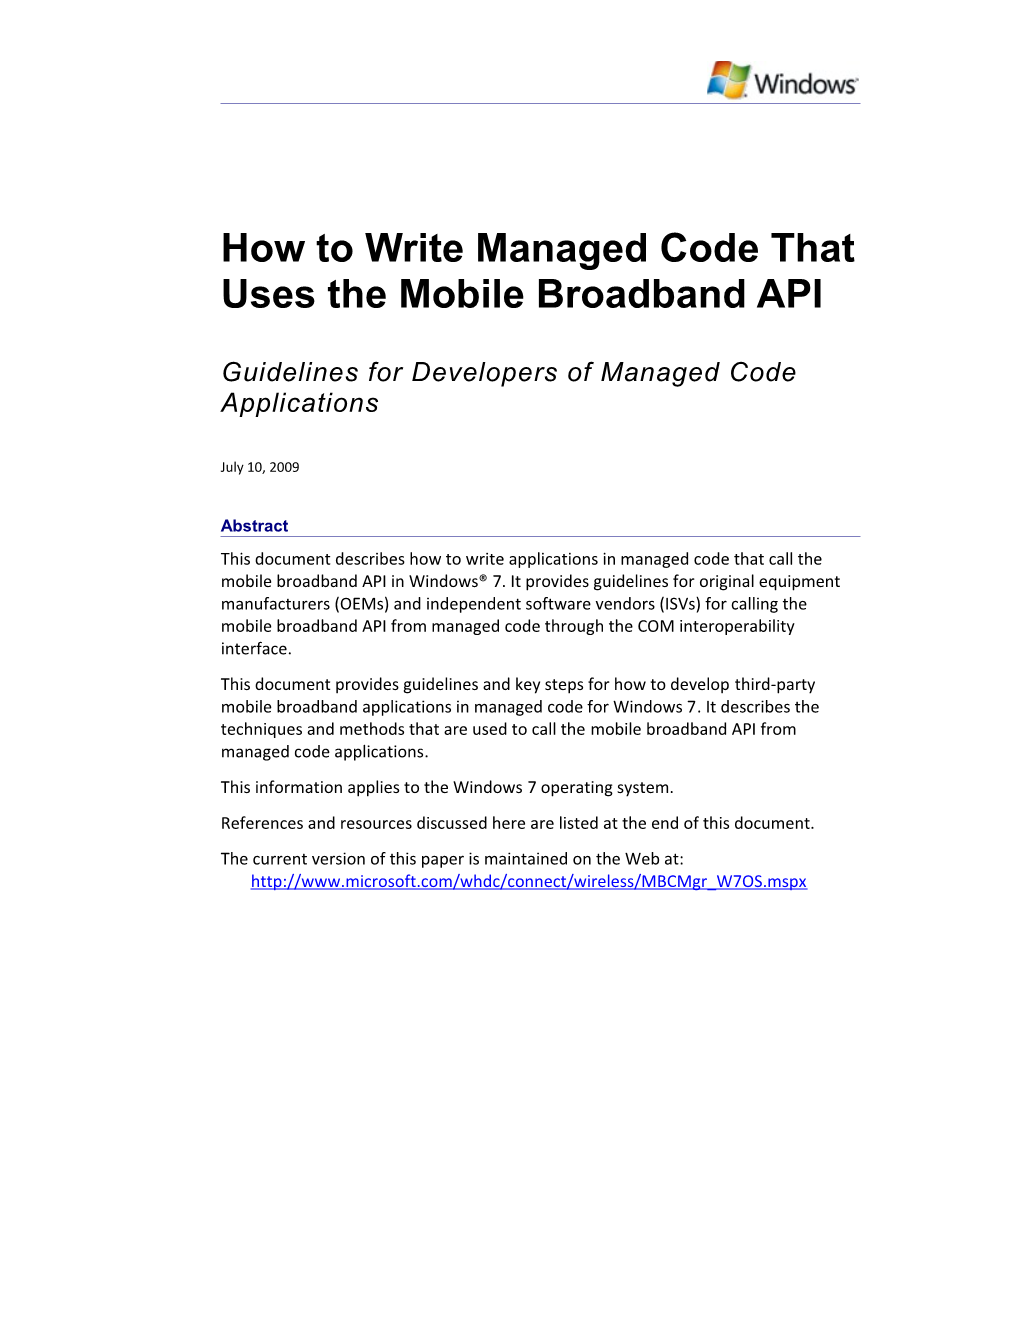 How to Write Managed Code That Uses the Mobile Broadband API - 1